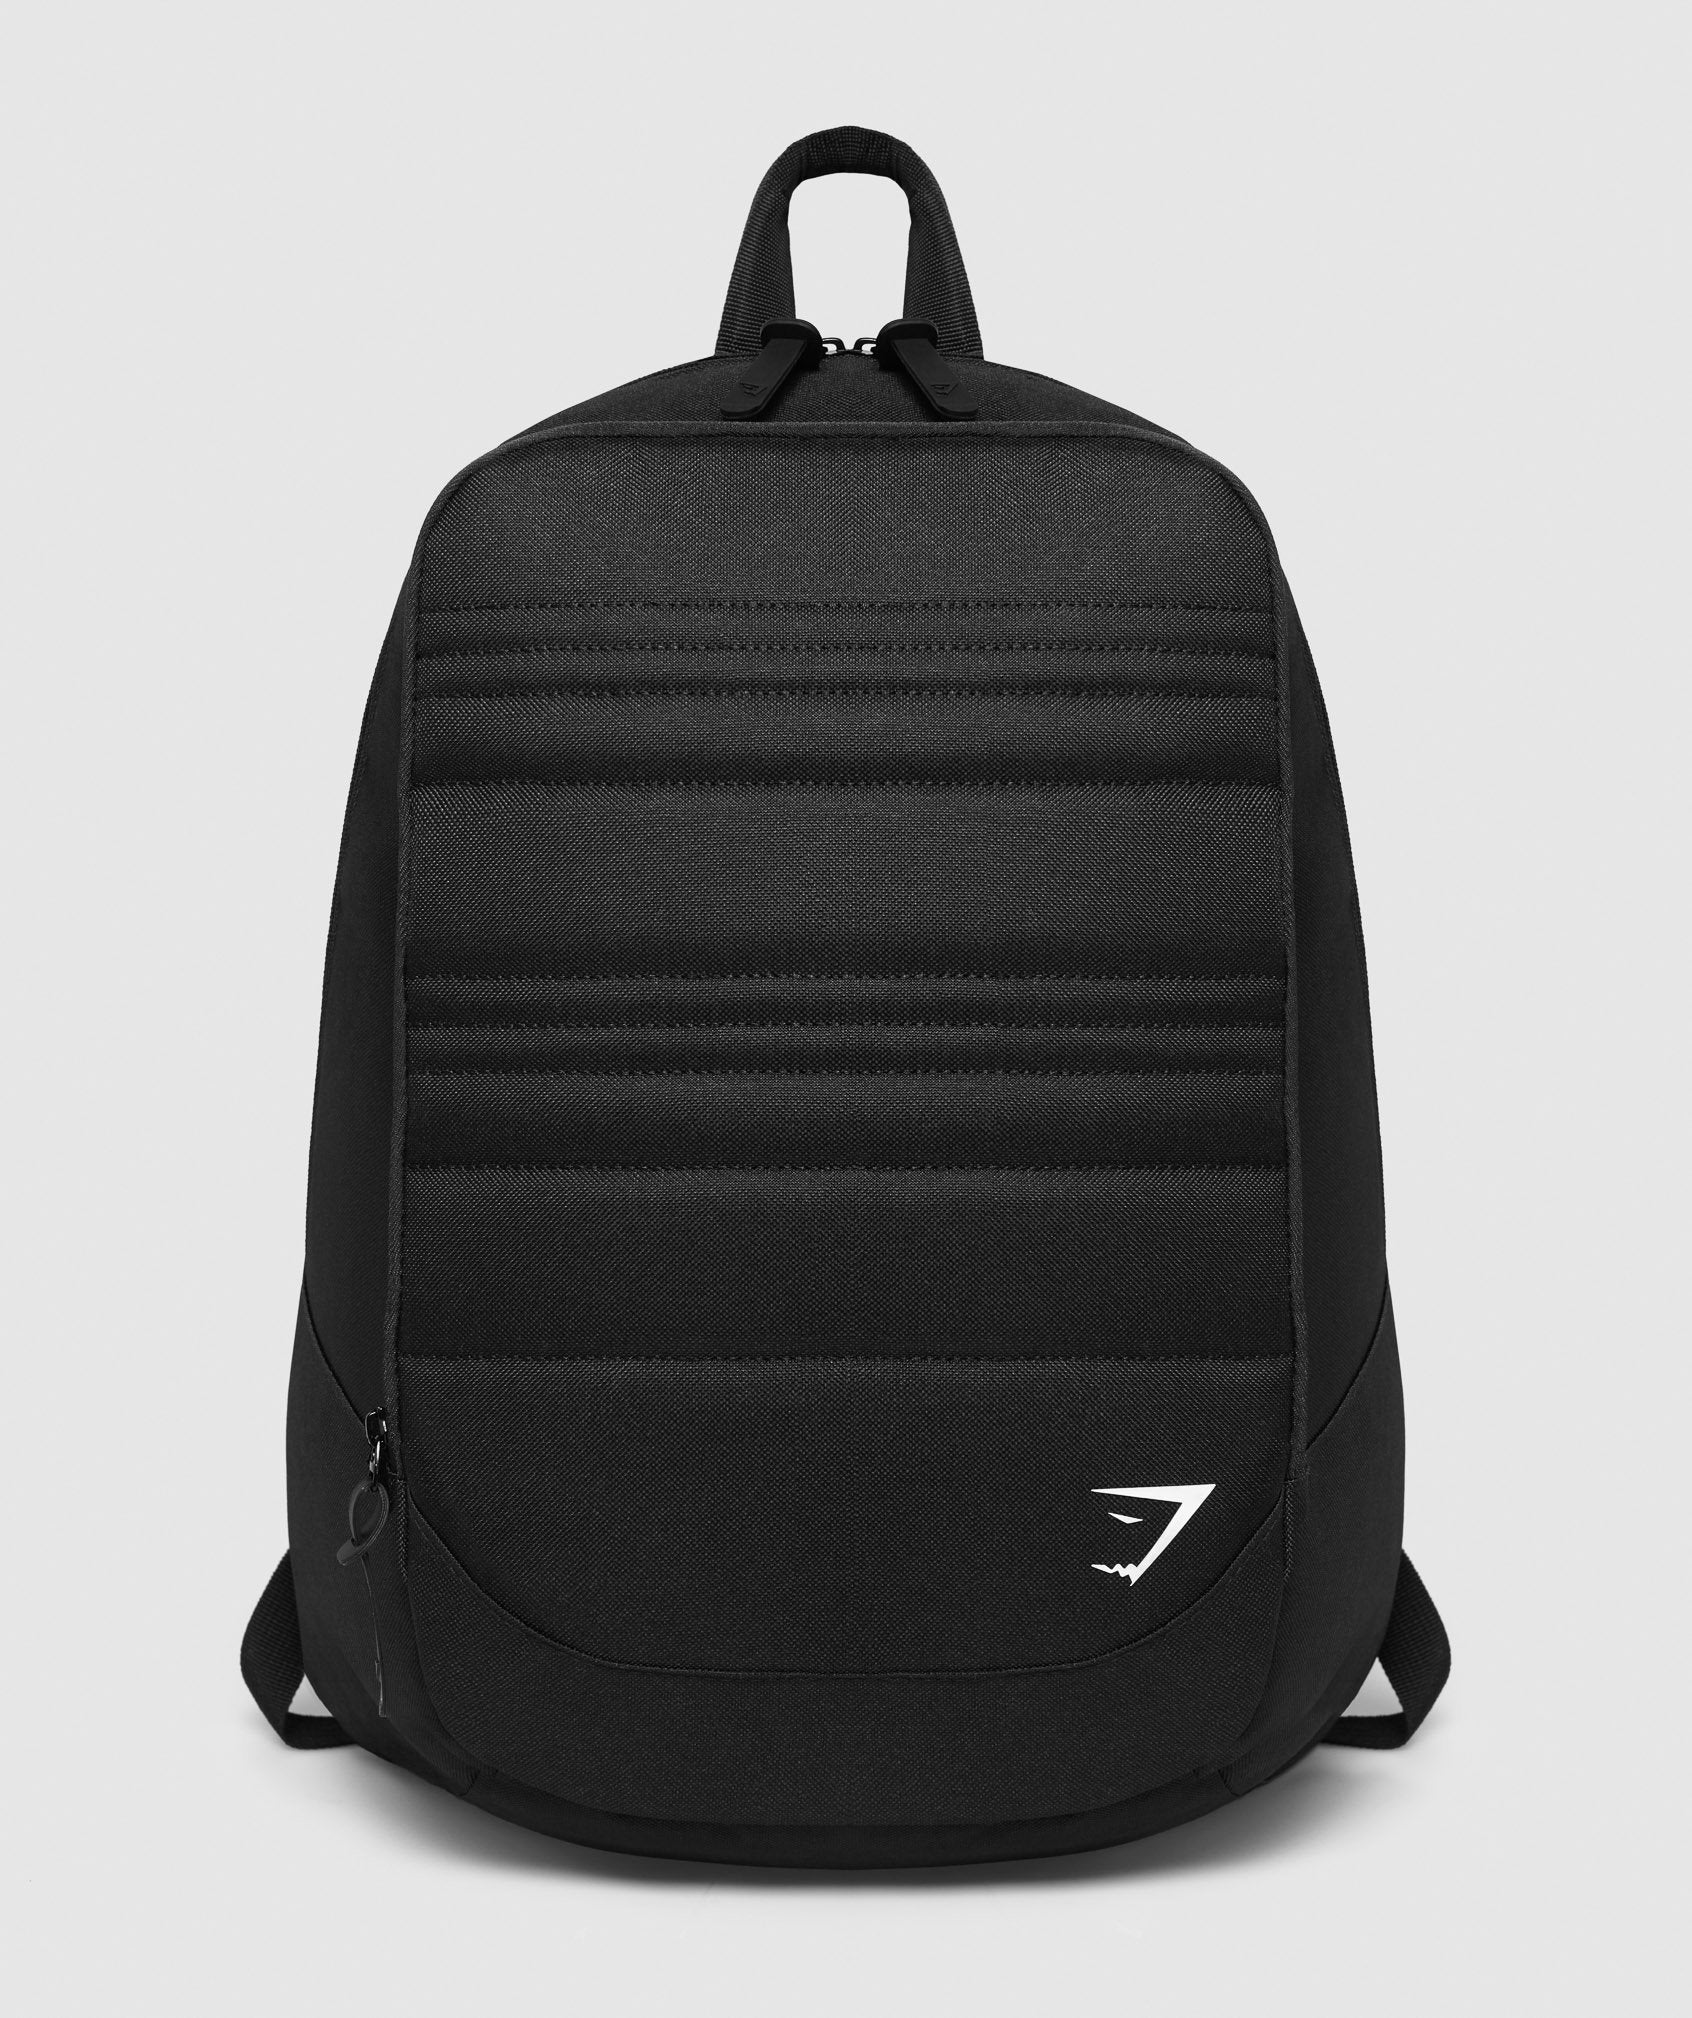 GS Backpack in Black - view 1